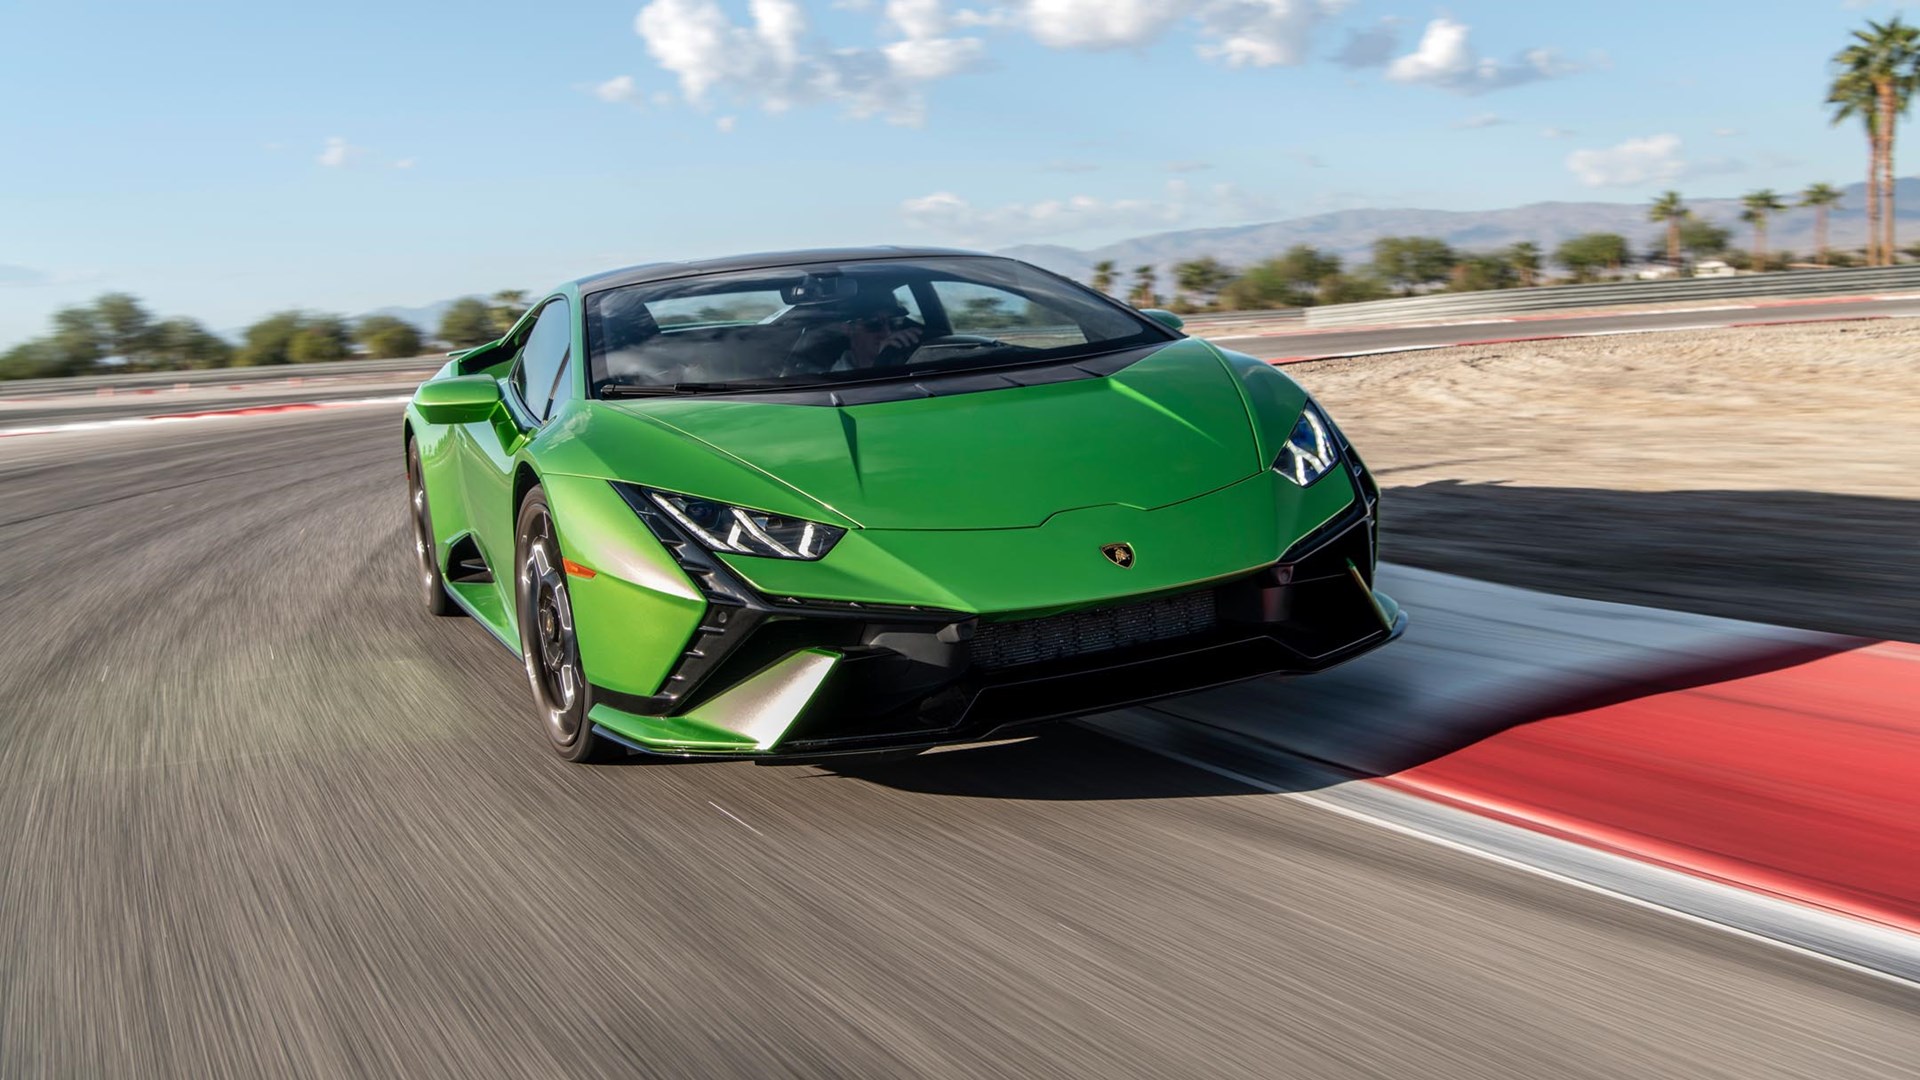 Front angled shot of a green Lamborghini Huracan Tecnica on a race track.